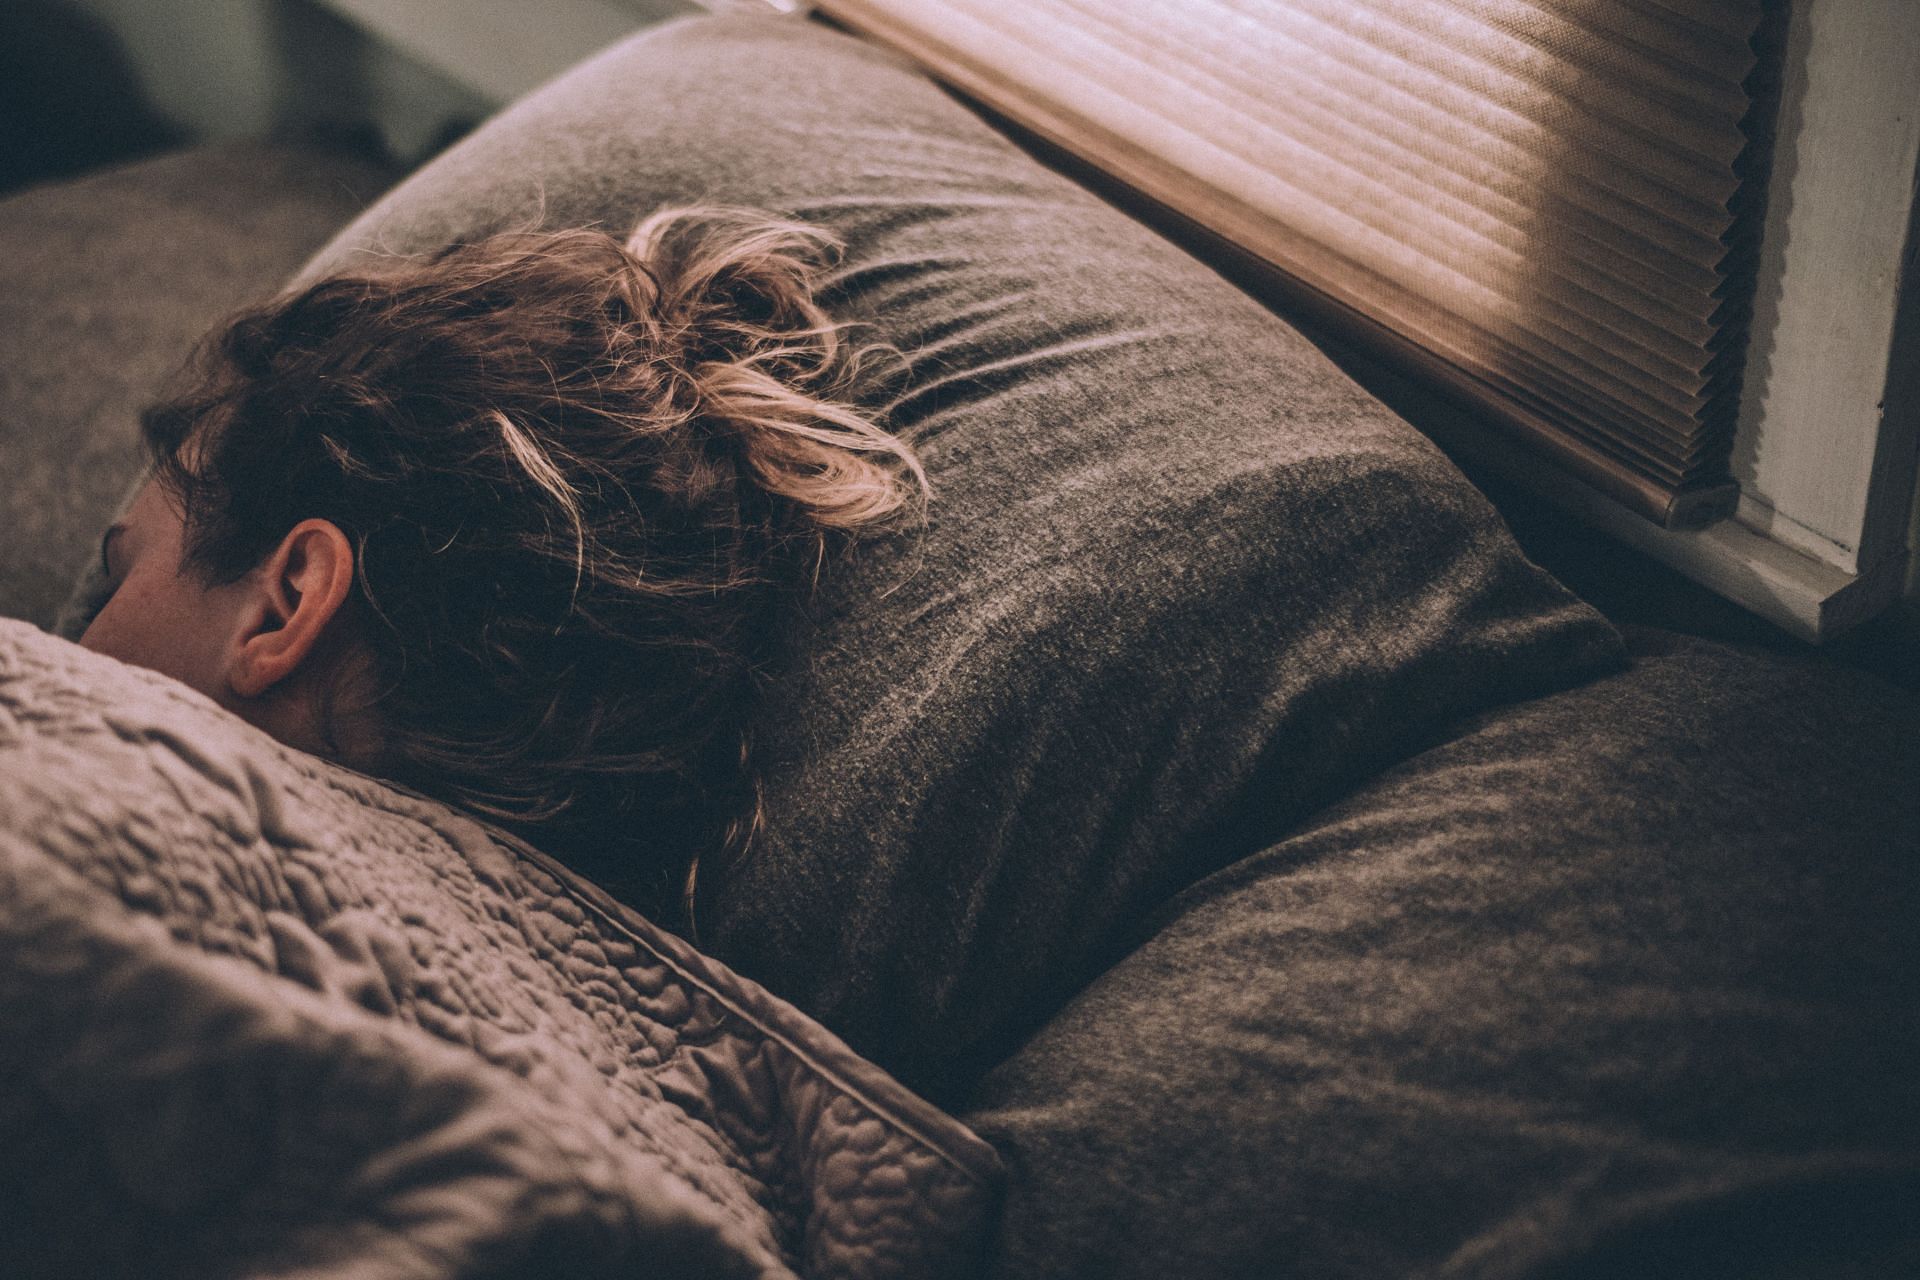 Sleep is essential for both physical and mental health. (Image via Unsplash/Gregory Pappas)